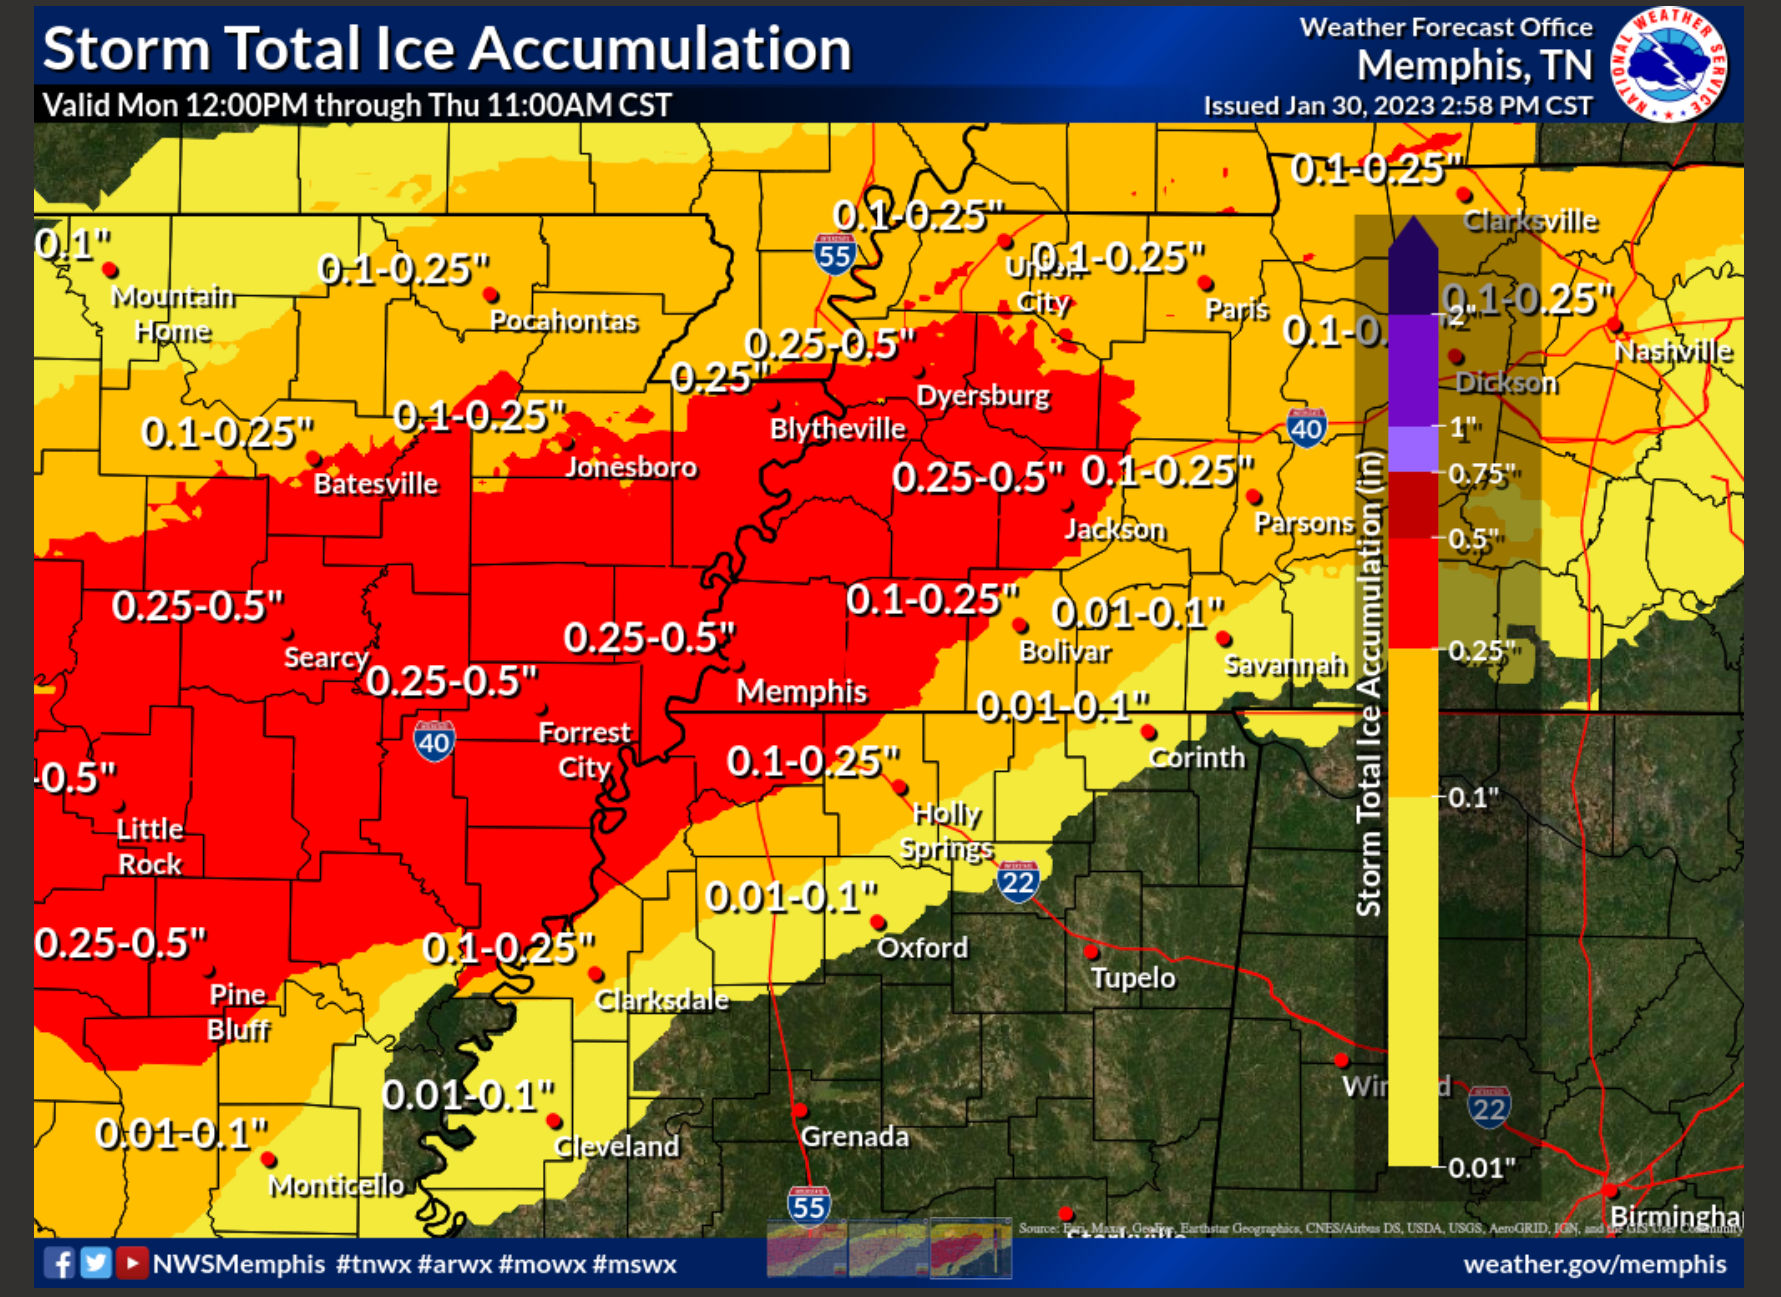 West Tennessee on weather advisory amid incoming ice storm